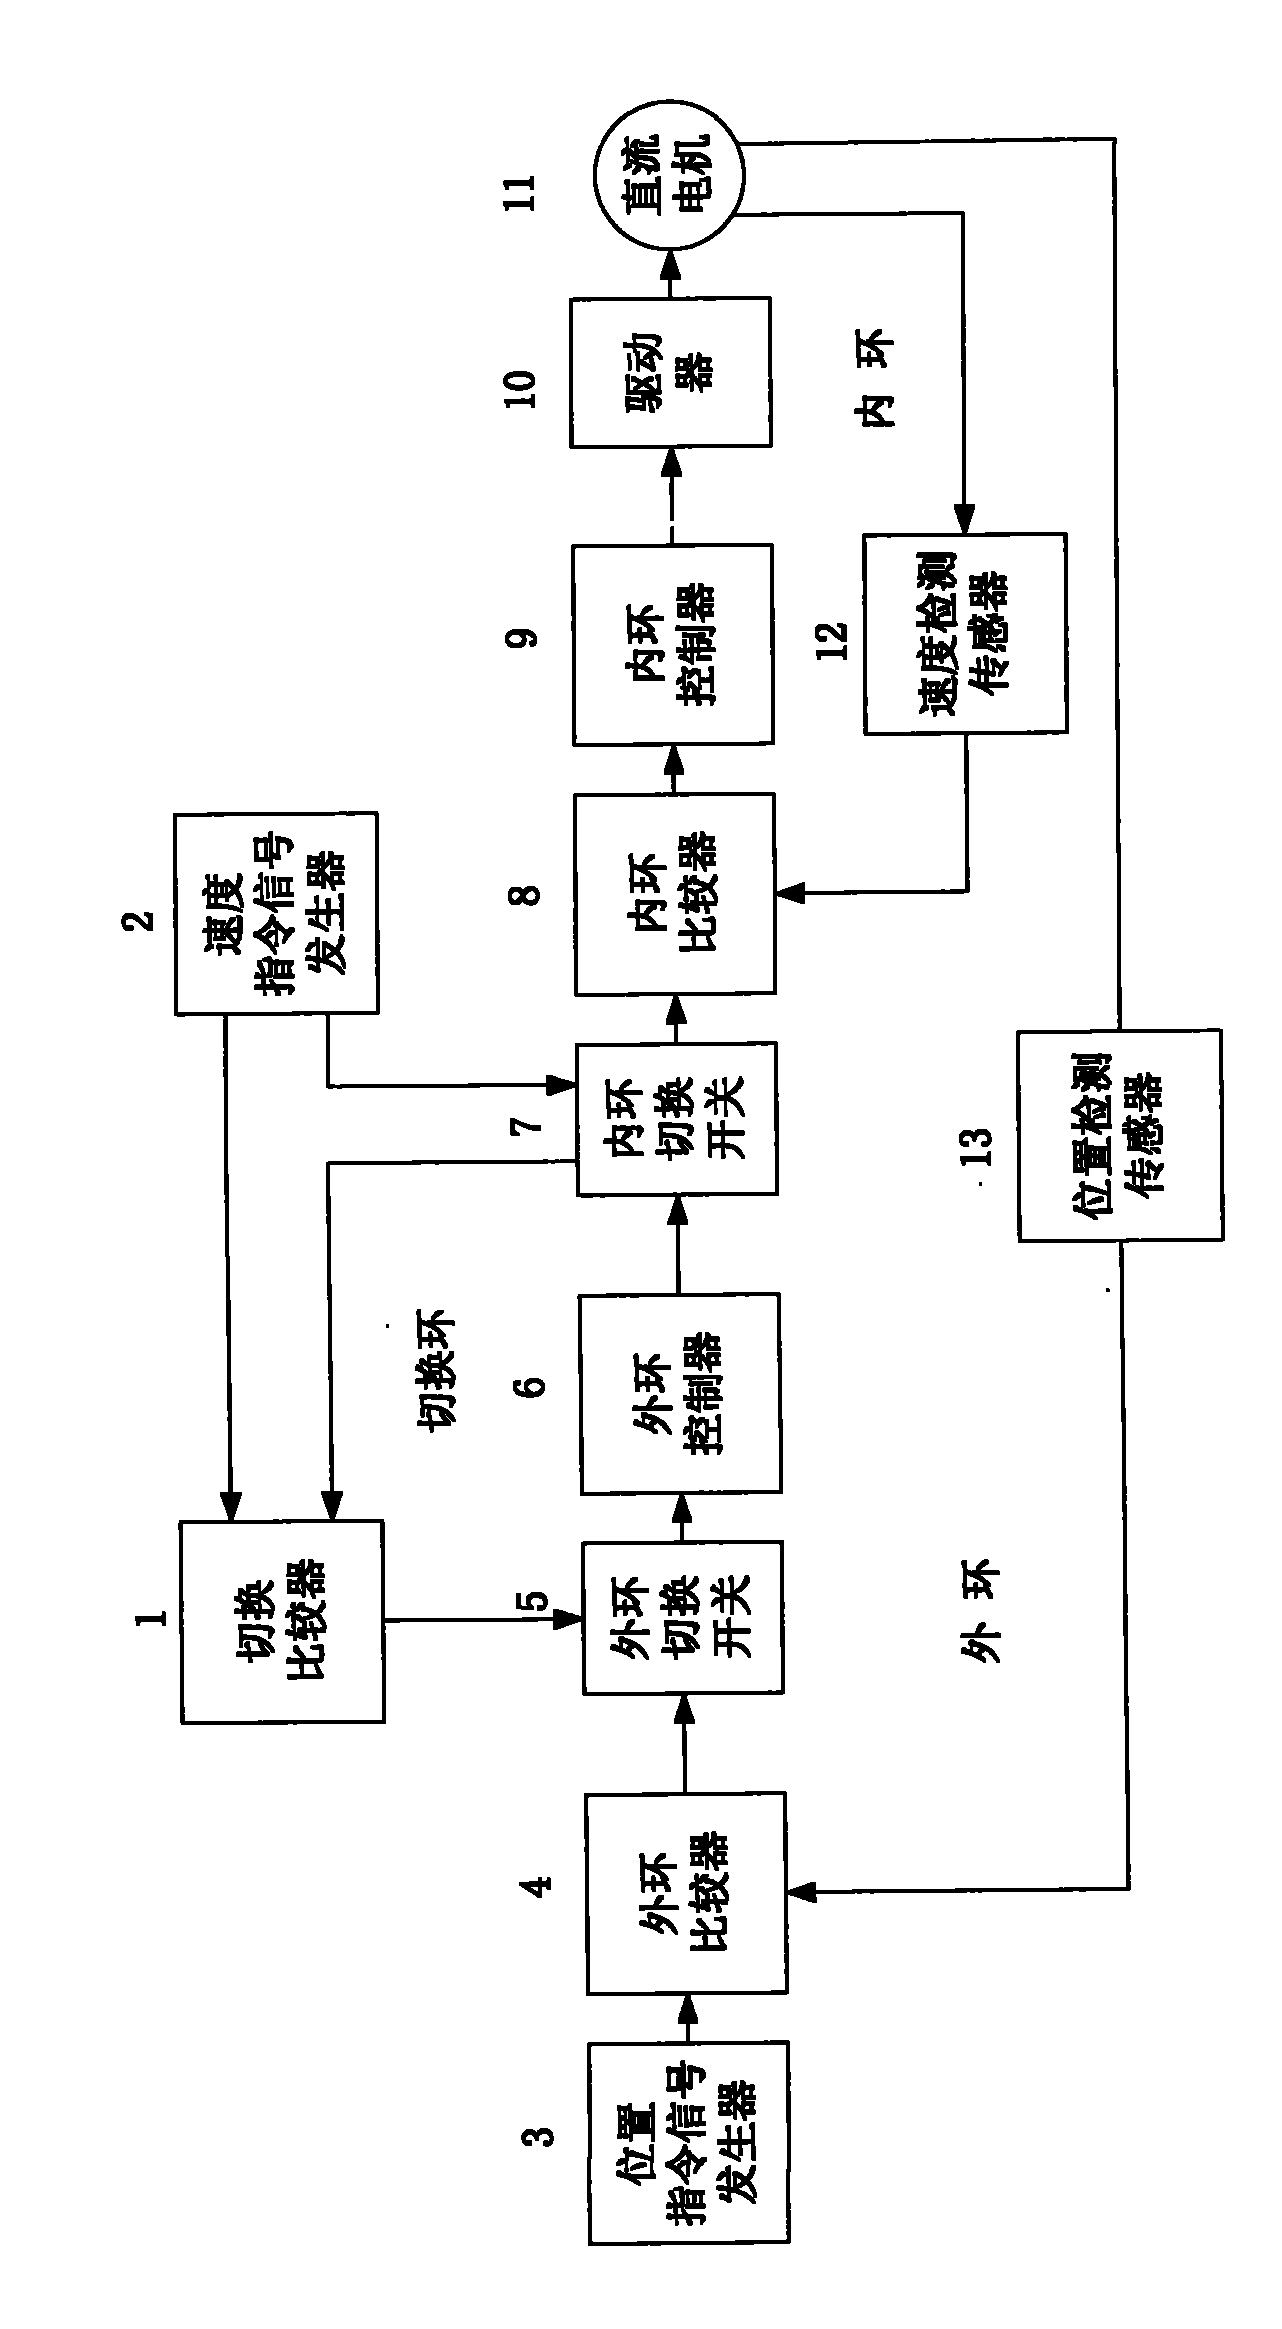 Dc motor controlling system capable of on-line switch over between velocity and position and its switch over method